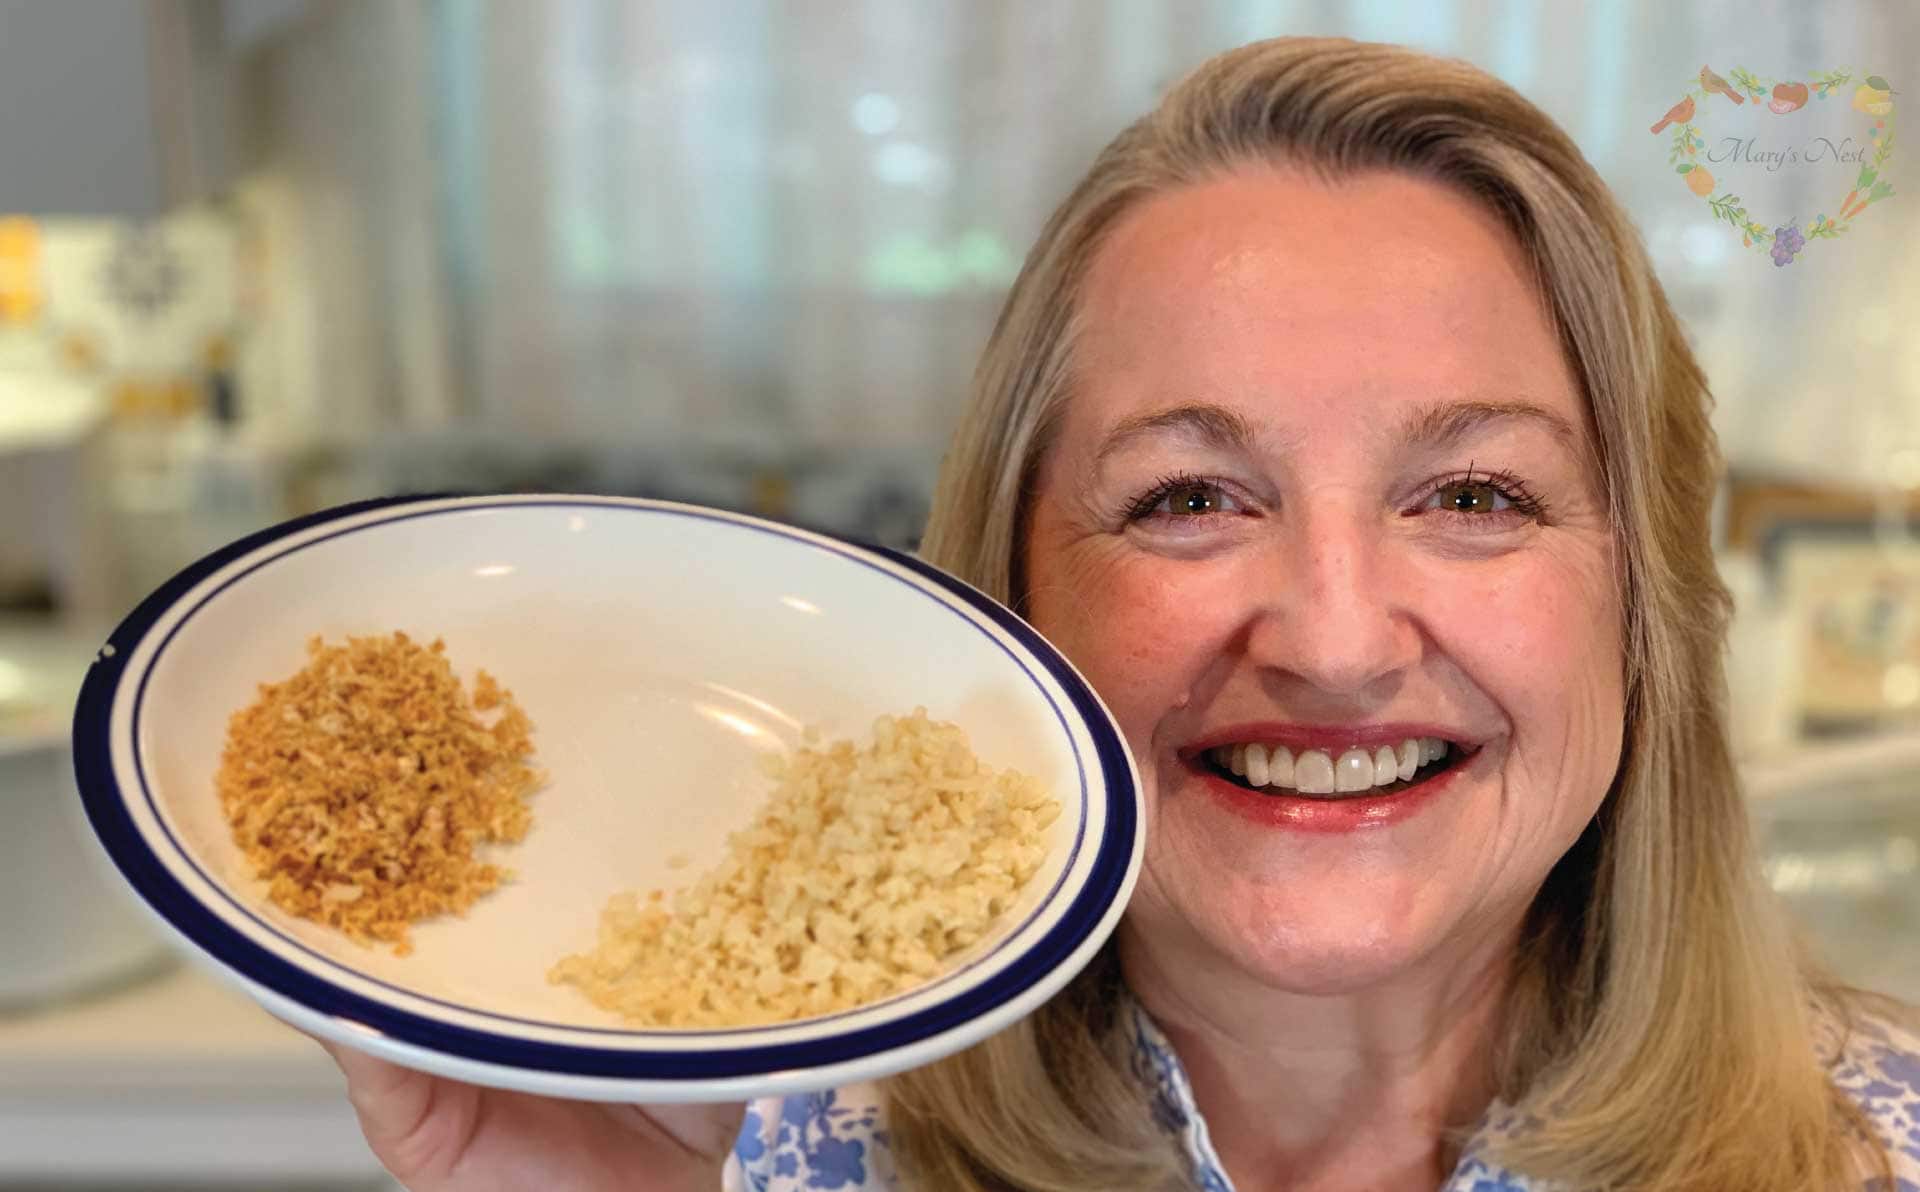 Mary holding a plate with dehydrated cauliflower rice.